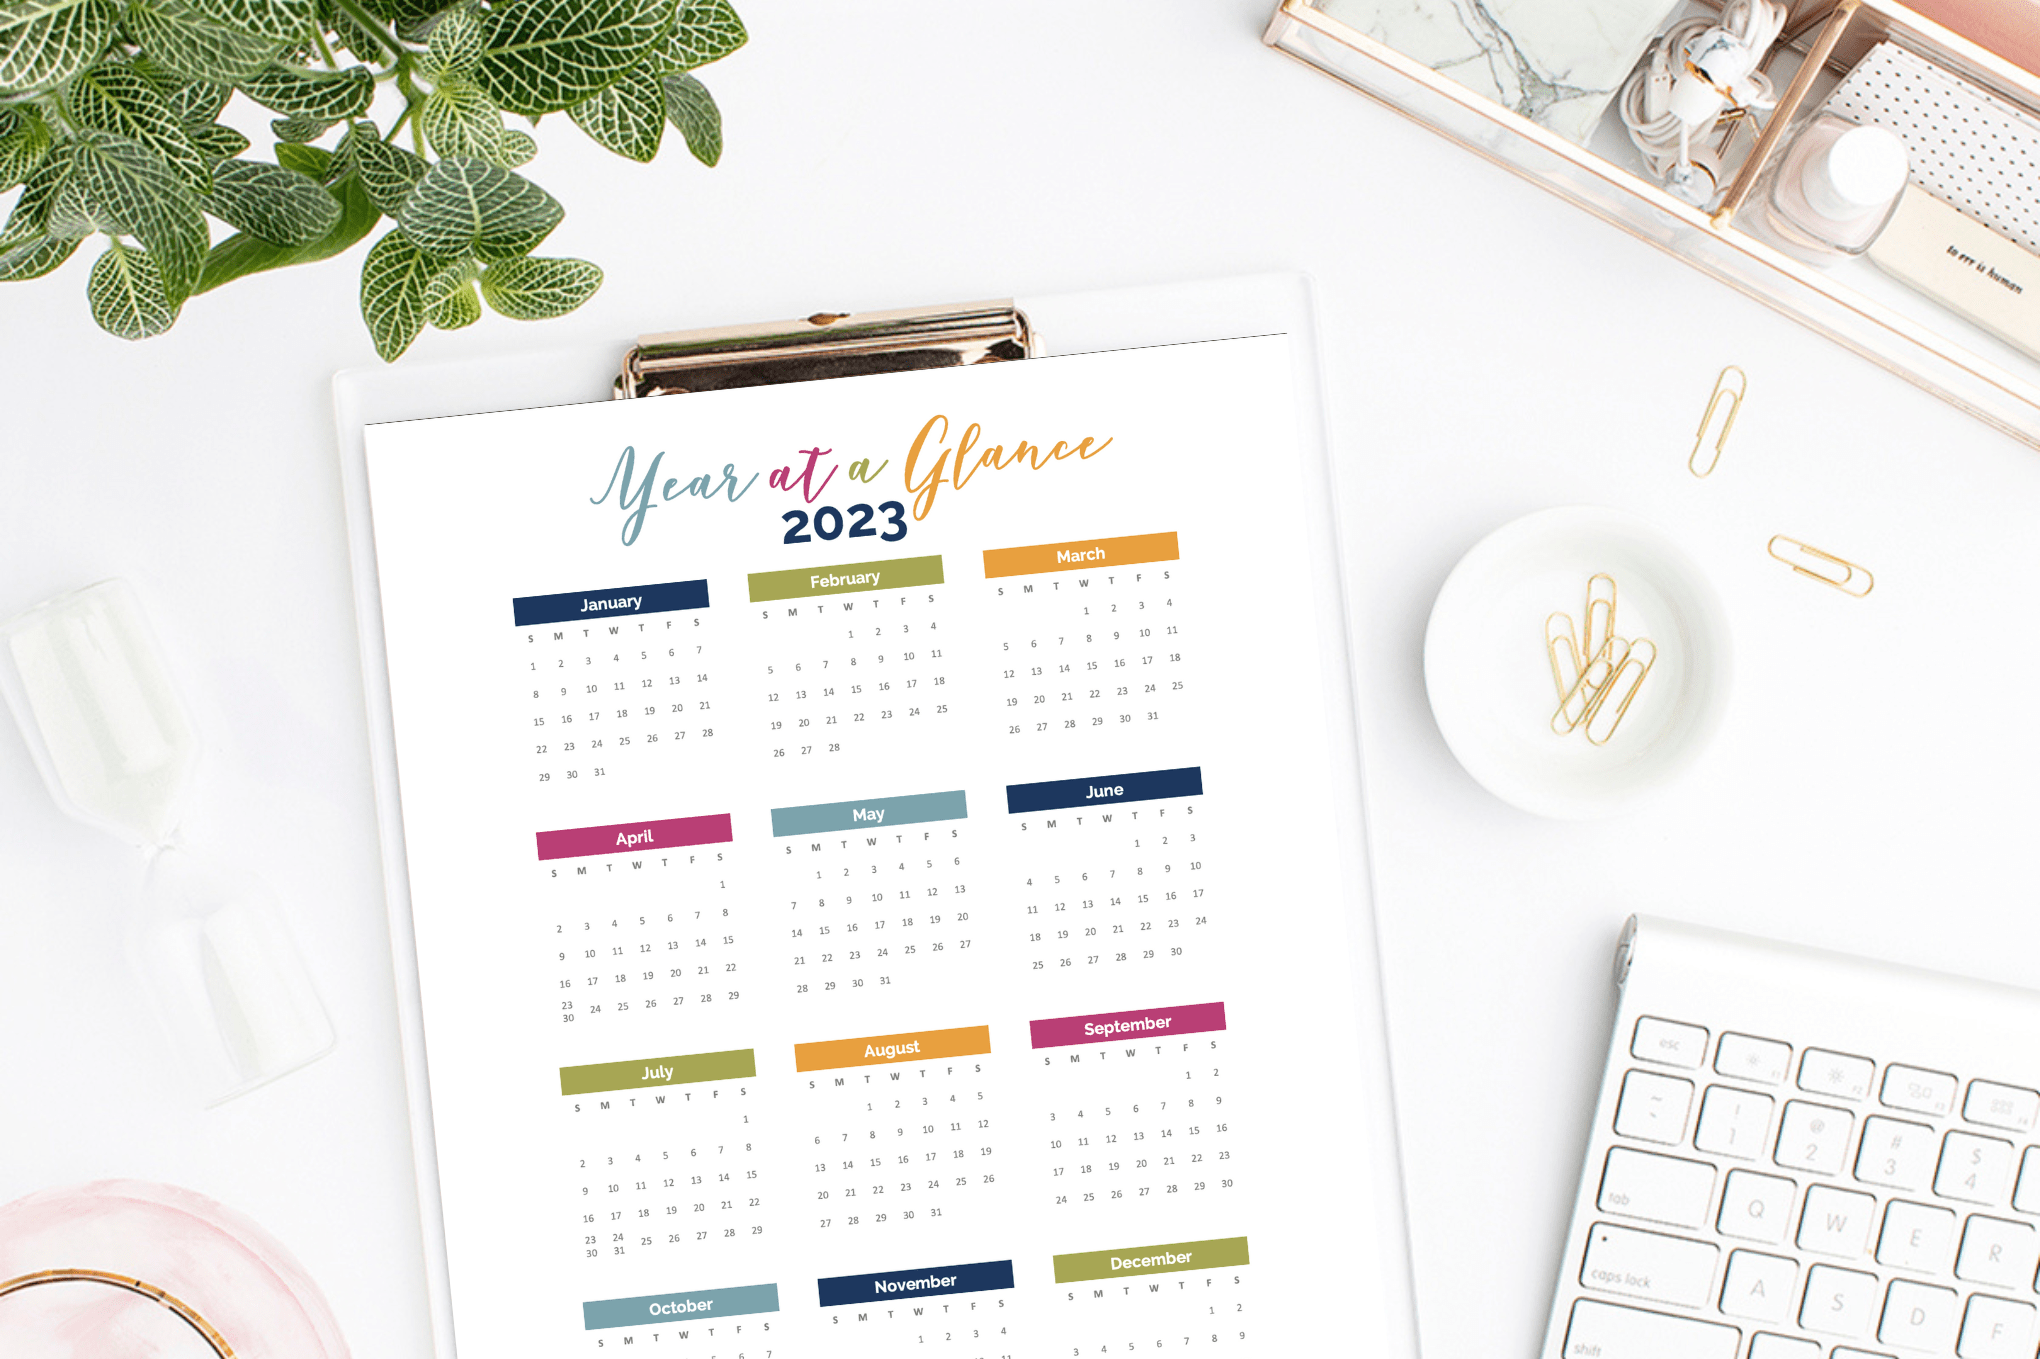 Free Printable Year at a Glance Calendar: New 2023